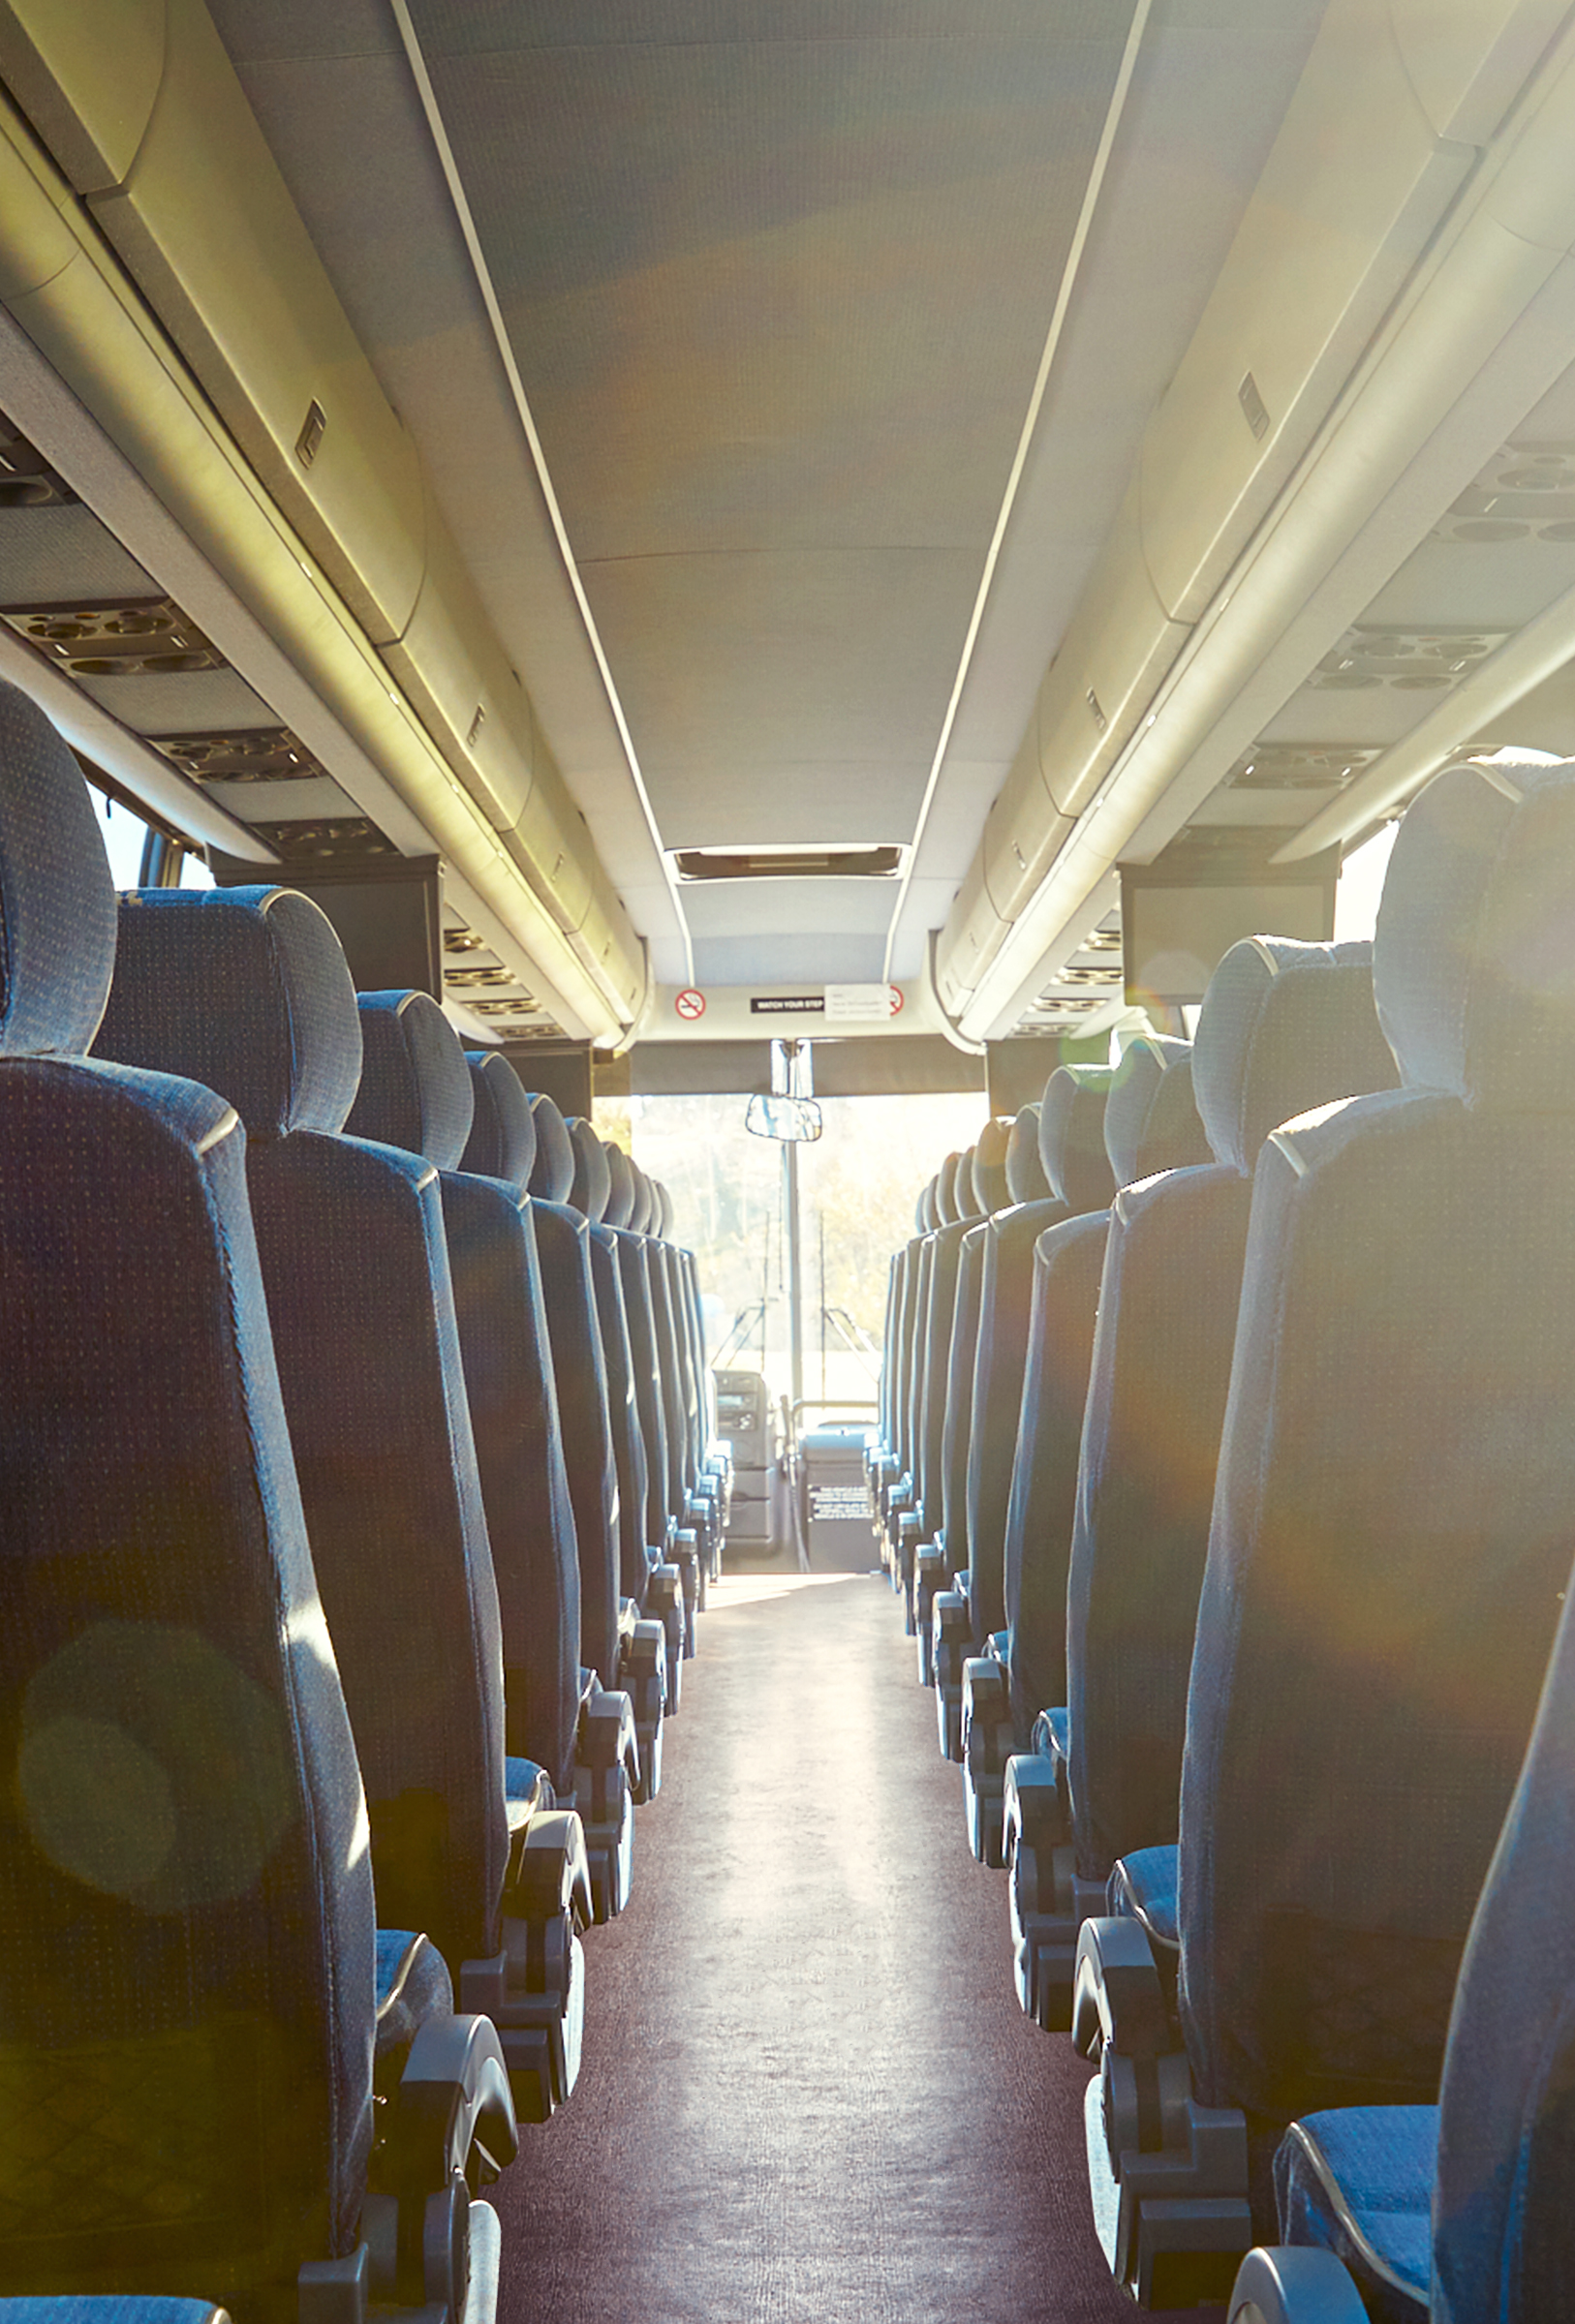 Passenger motorcoach charter bus seating and aisle